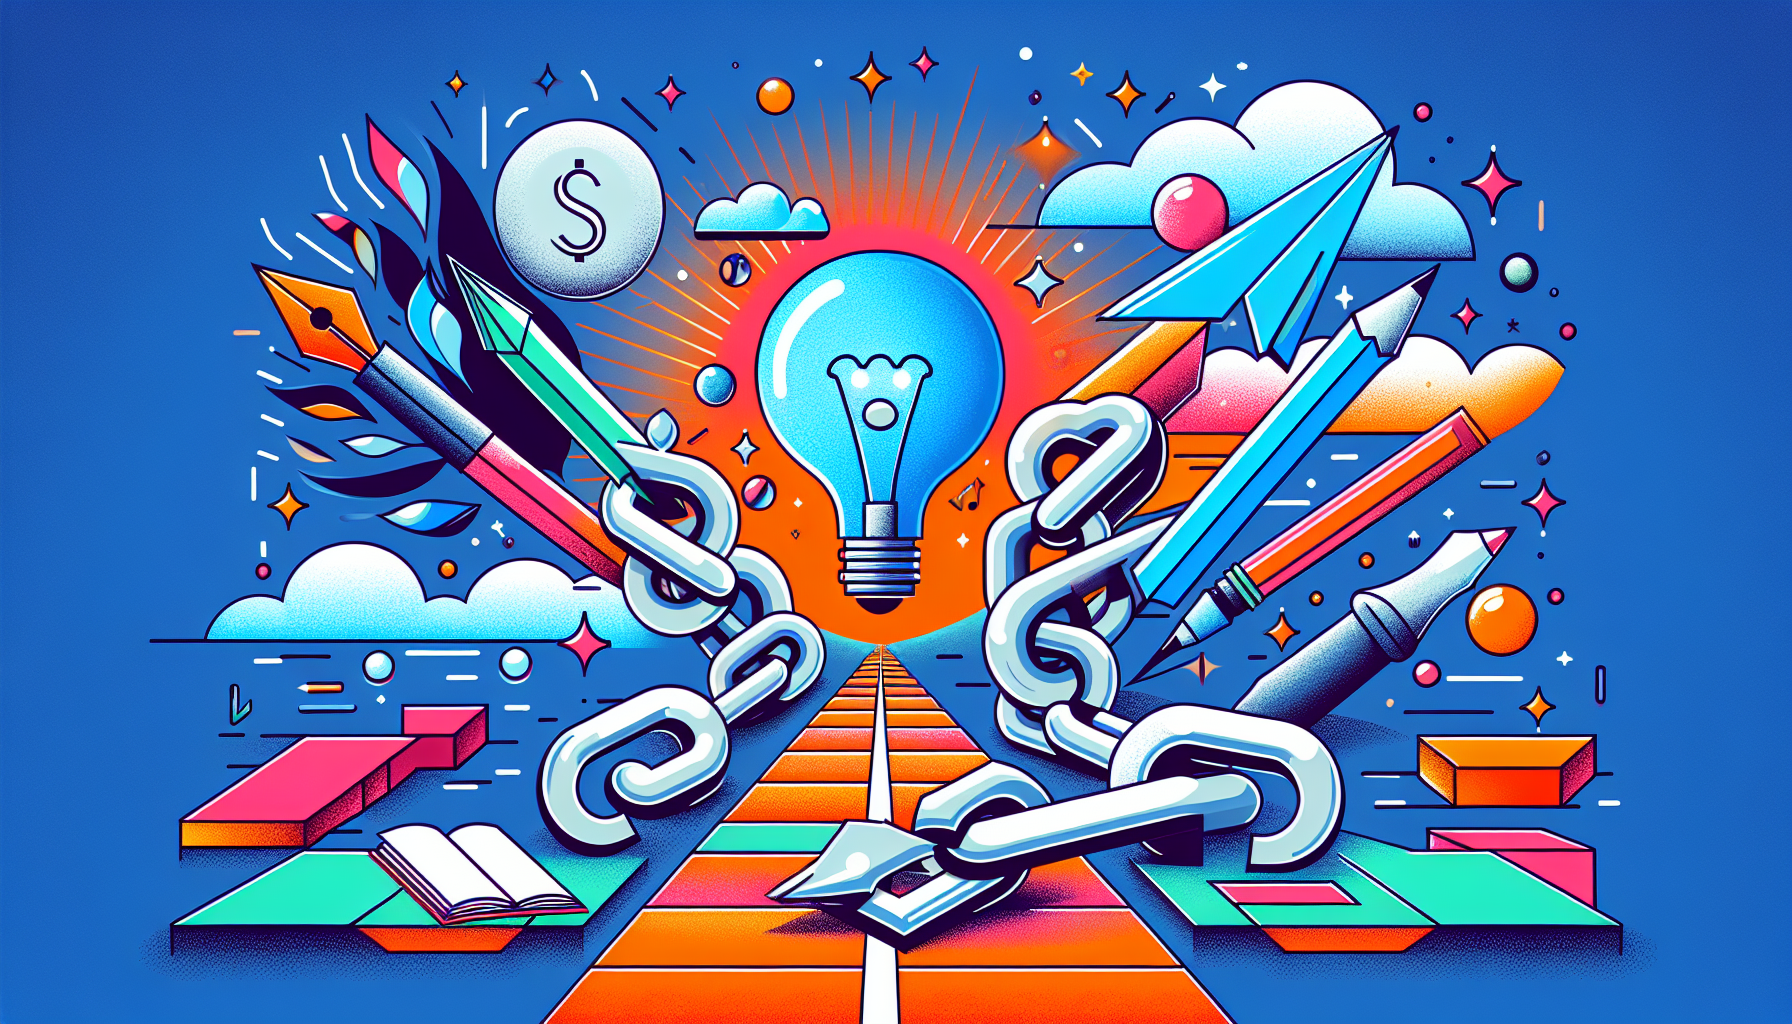 An abstract, modern, and colourful illustration depicting the concept of overcoming writer's block for screenwriters. The image could possibly include symbols like a broken chain symbolizing the breaking free from the block, a bright light bulb for the burst of inspiration, a fountain pen to represent writing, and a clear pathway, illustrating the newly found direction and progress. The elements should be arranged in an innovative and visually pleasing way to reflect the modern style.